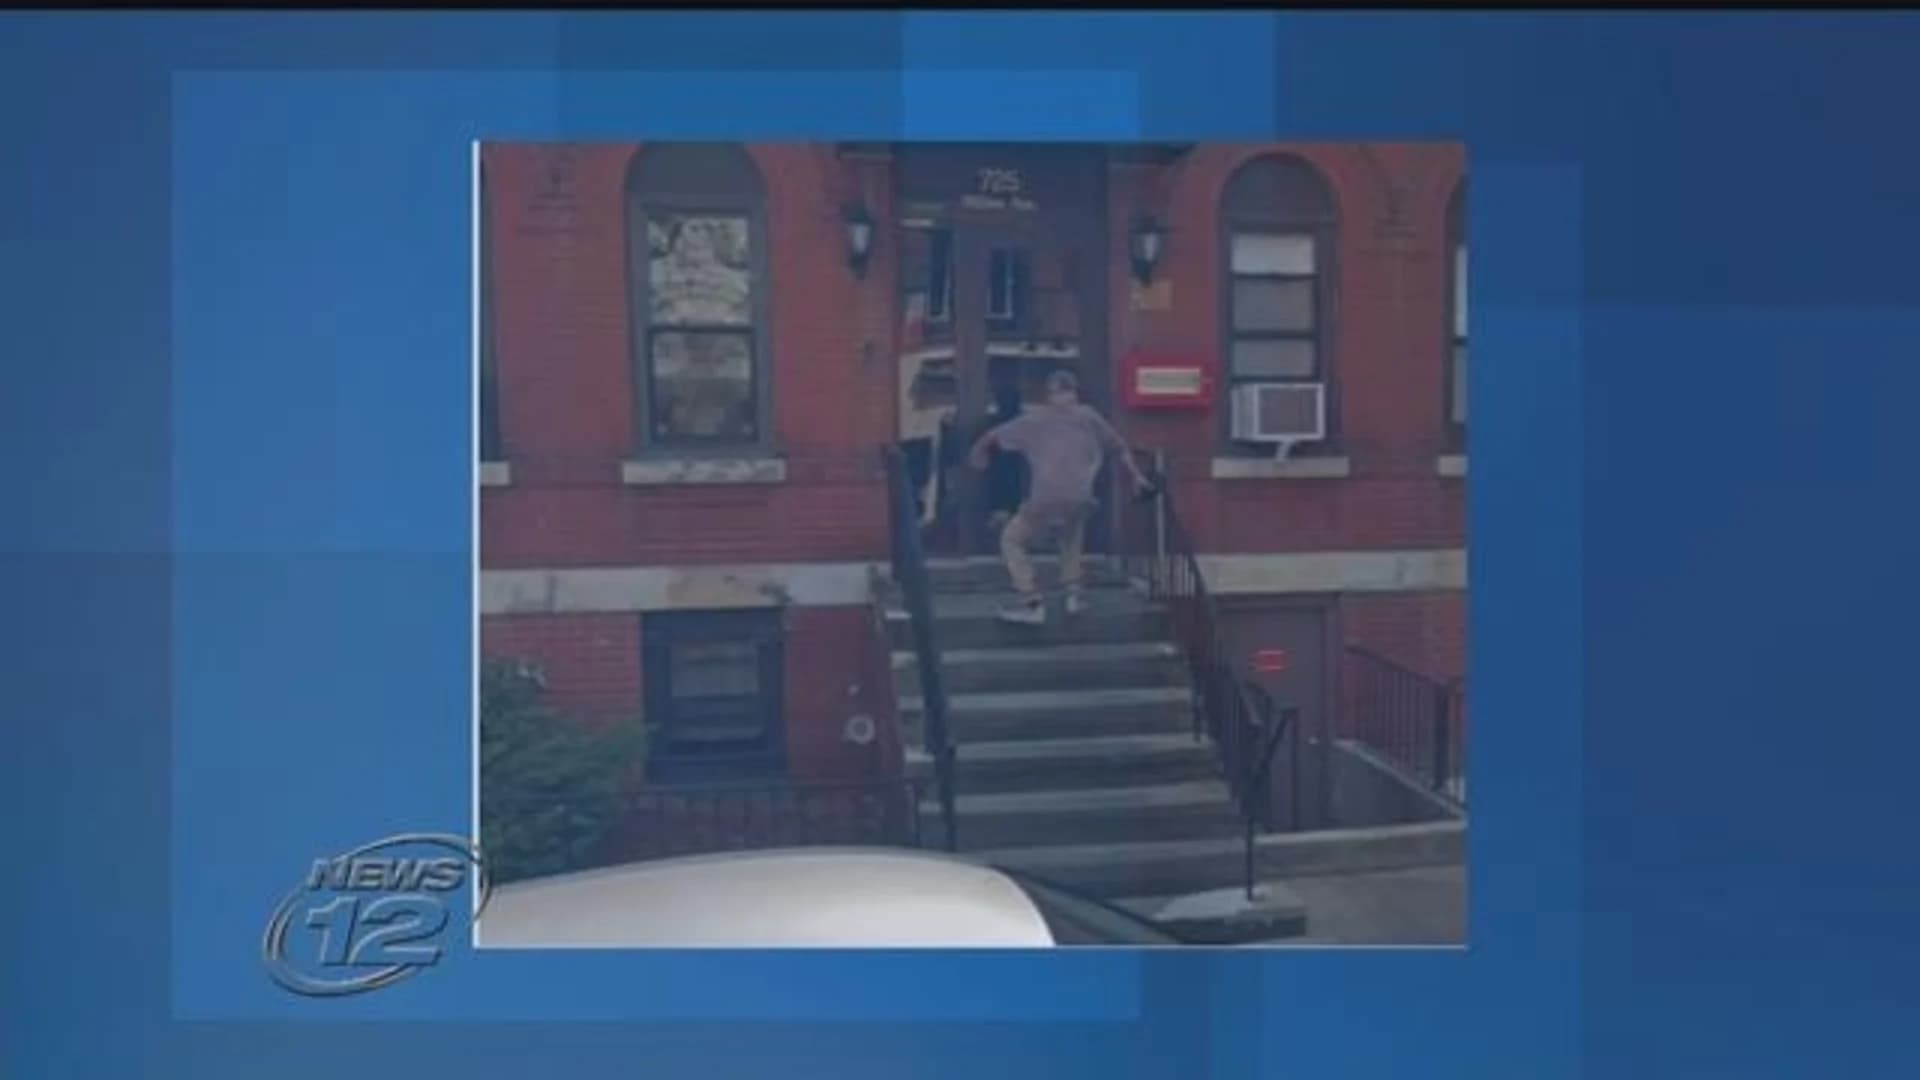 When mocking goes viral: ‘Falling man of Hoboken’ is a cautionary tale